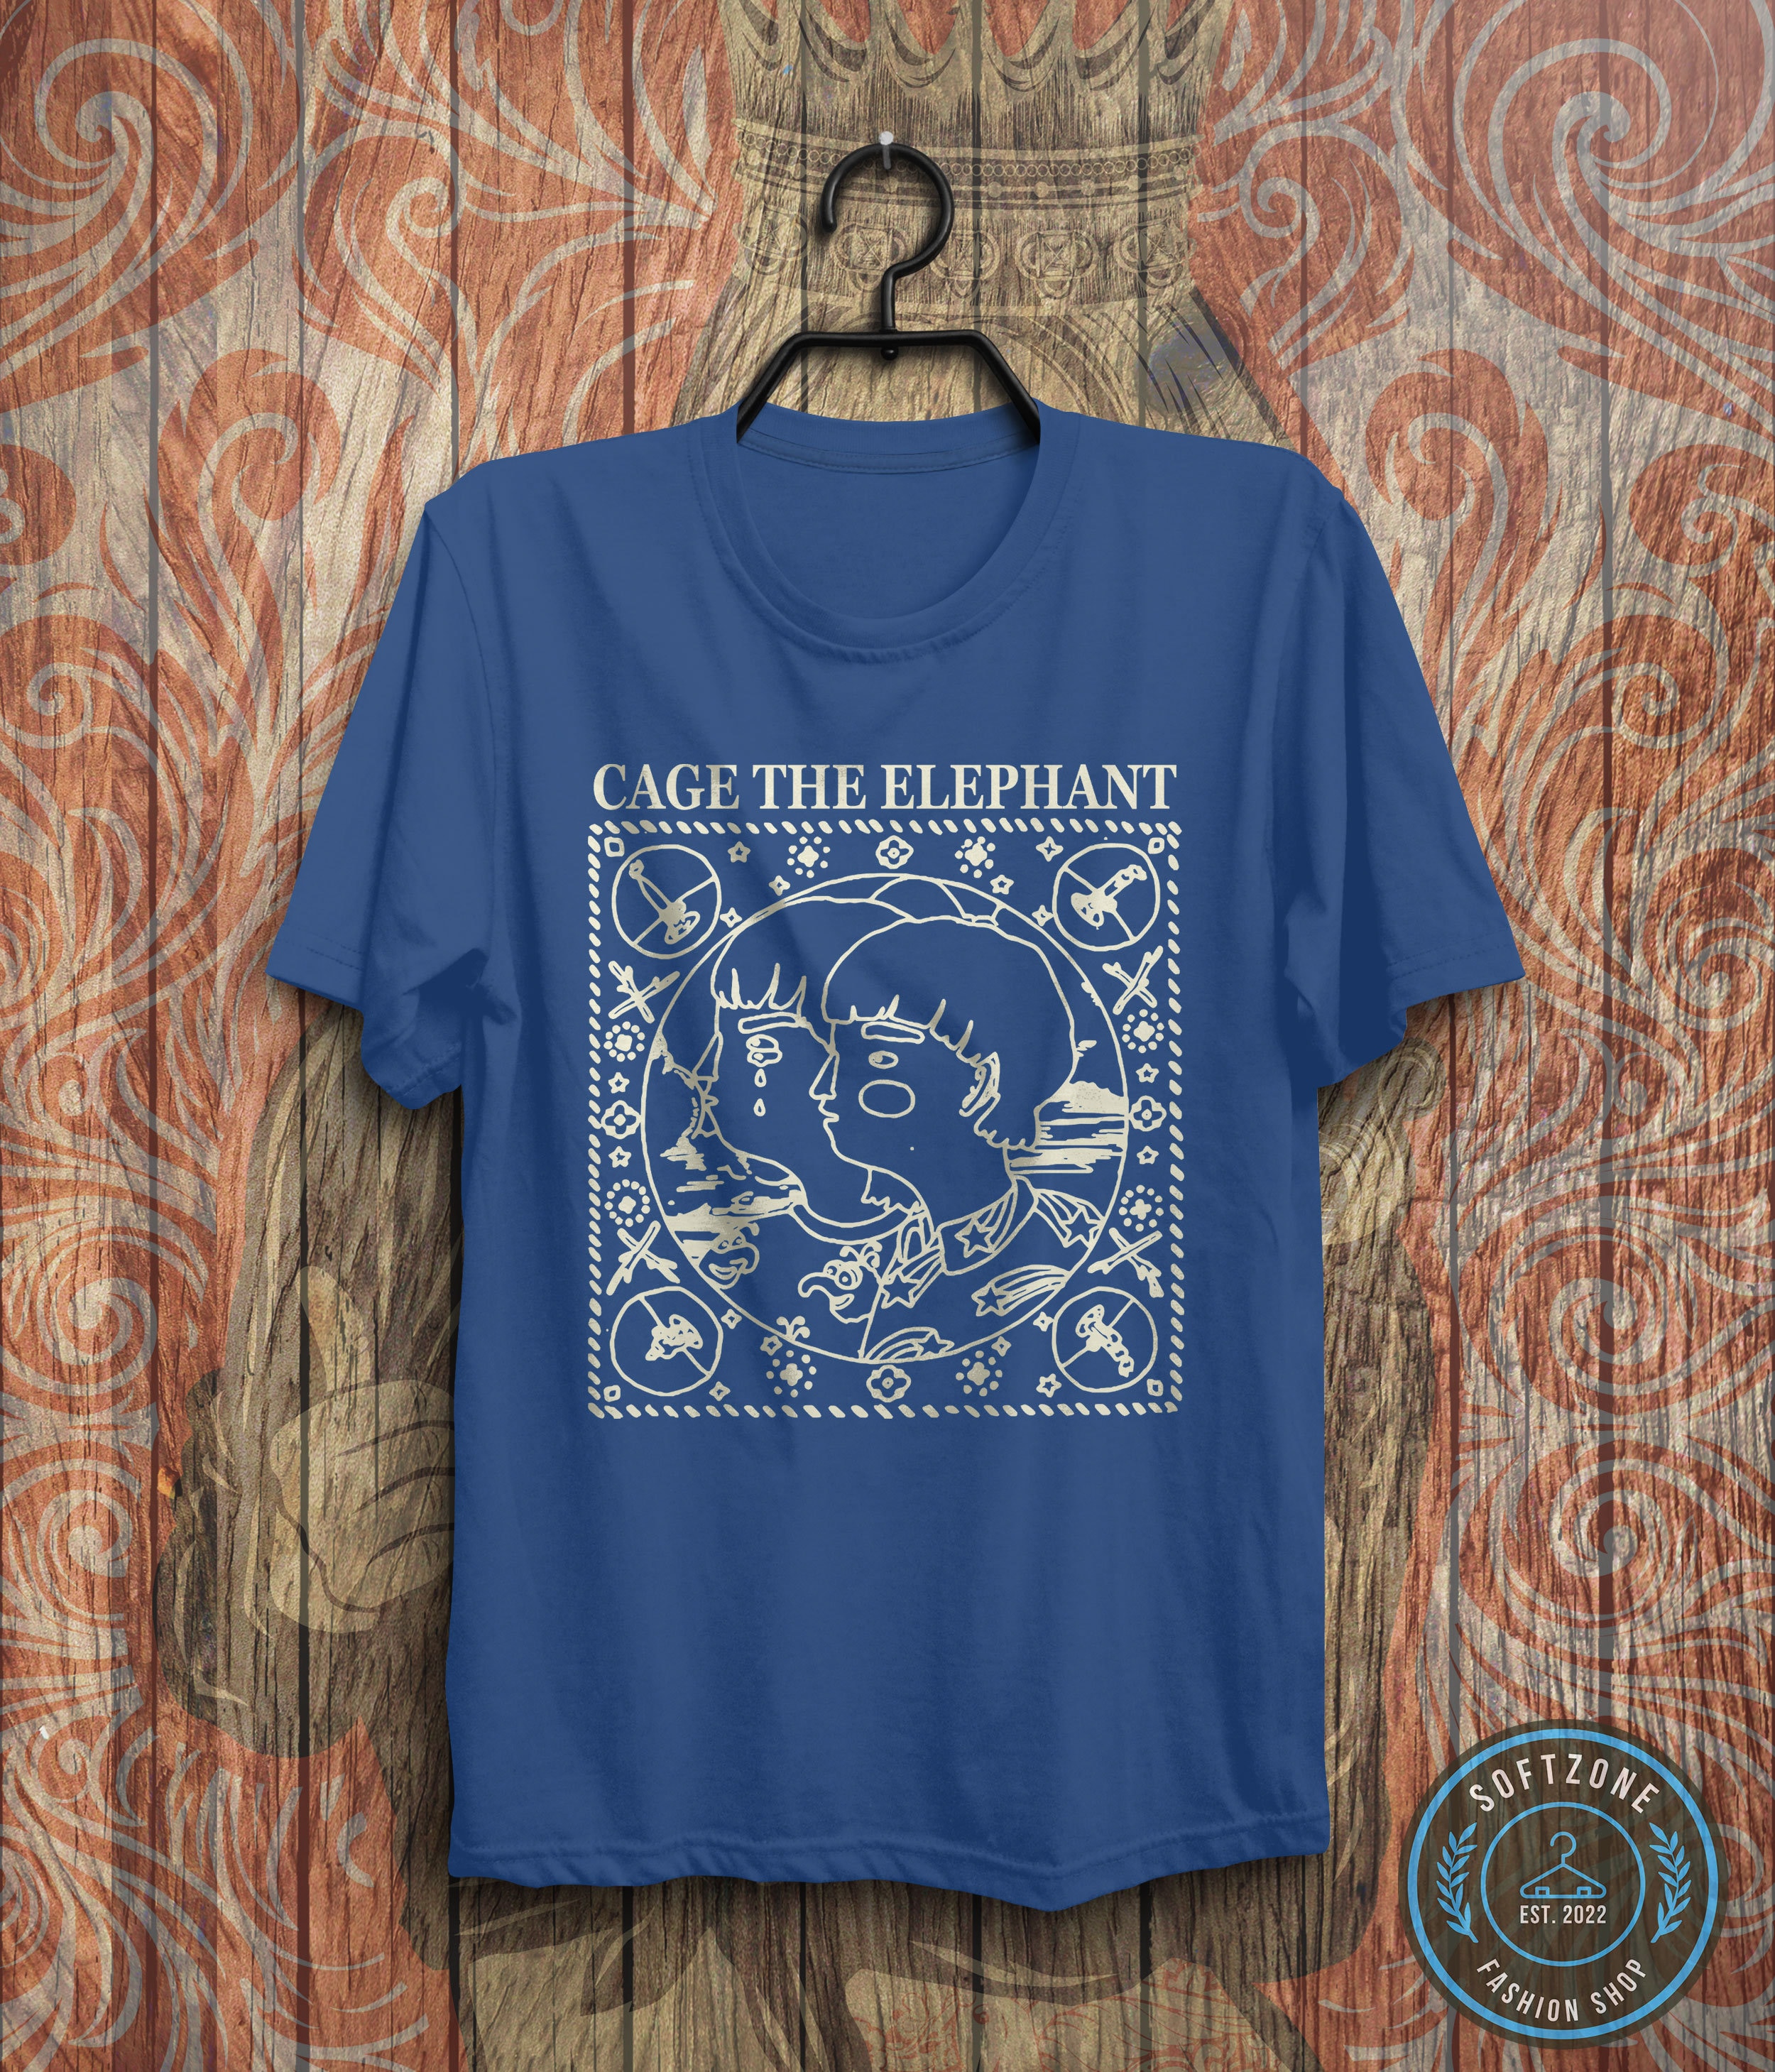 Cage the Elephant shirt designed by local teen